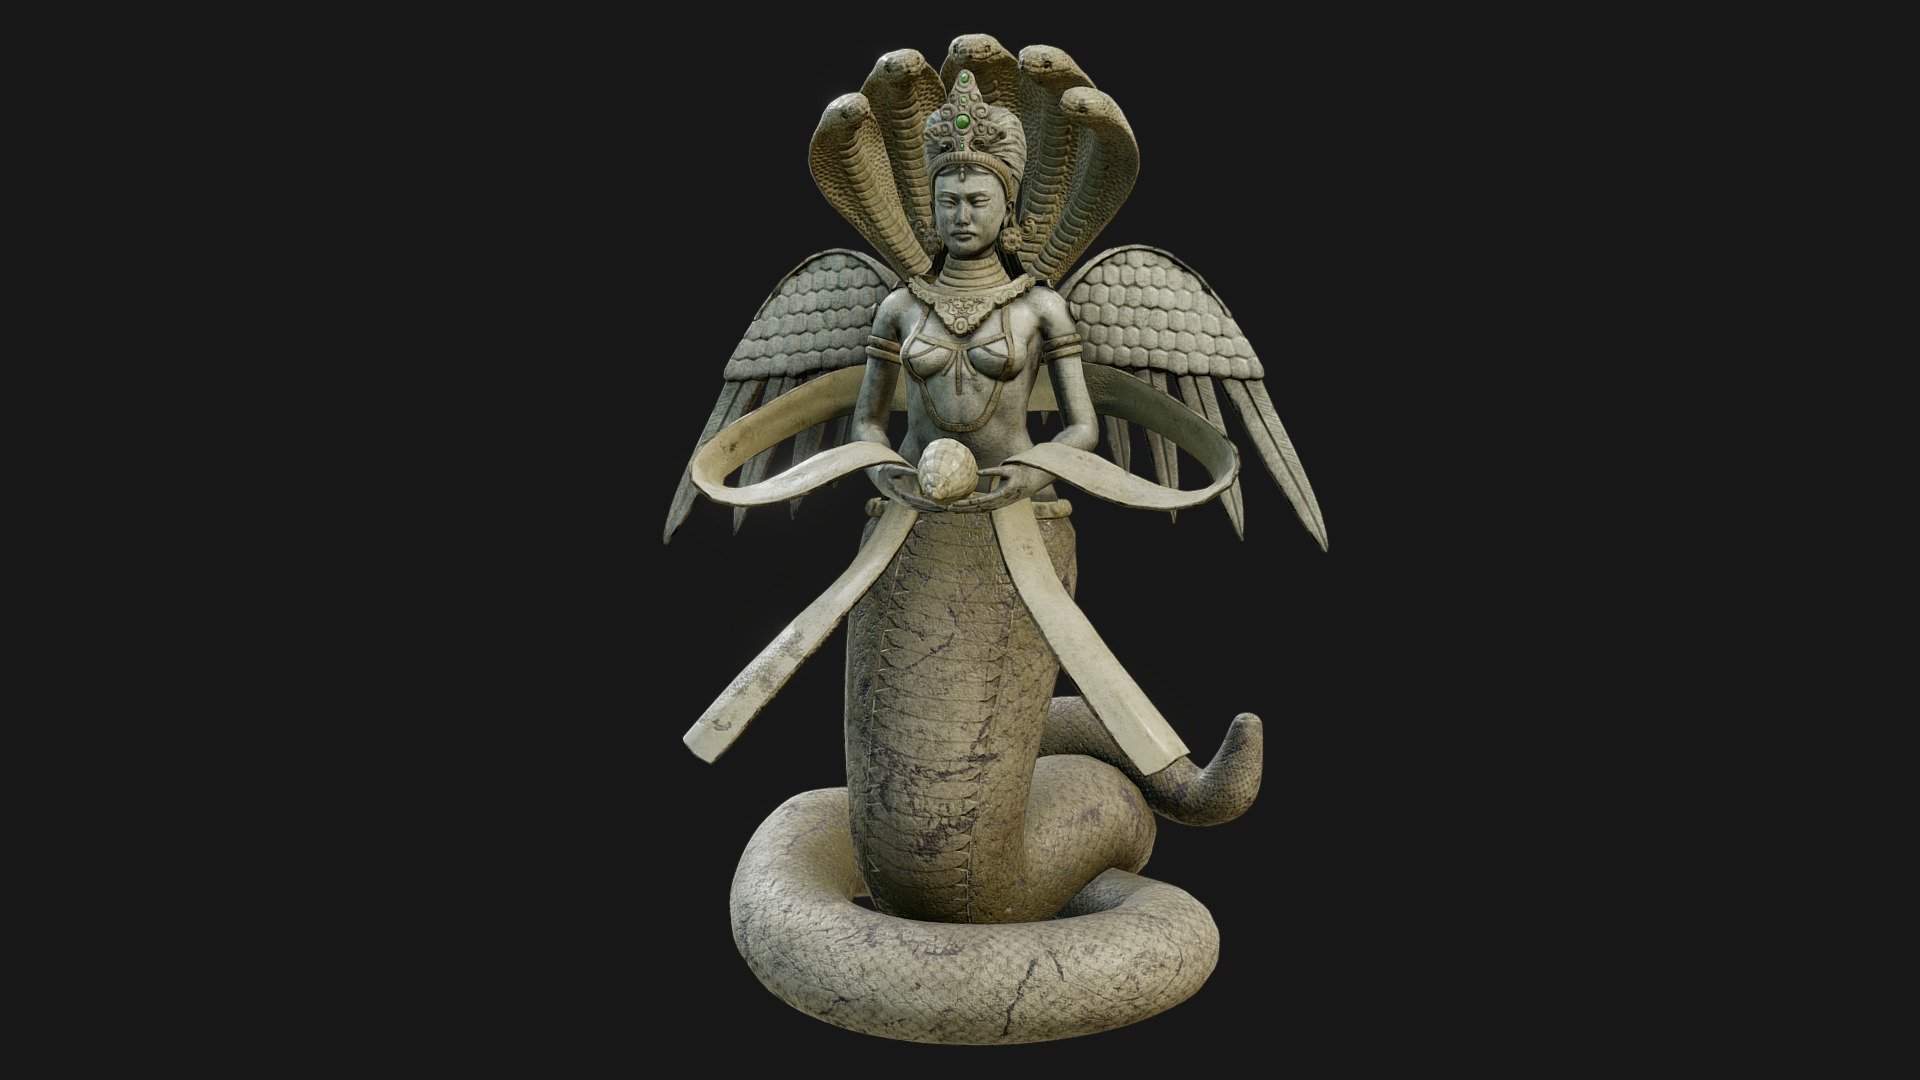 Naga Statue. Game-ready asset made for Samsara project with Infinity27's team. Sculpted in Zbrush, retopo and UVs with Maya, Substance Painter for textures and placed in Unreal engine.  I'm very greatfull for the help I've got and it was a pleasant experience! - Naga Statue - 3D model by Javier Carrillo (@Javieruh) 3d model